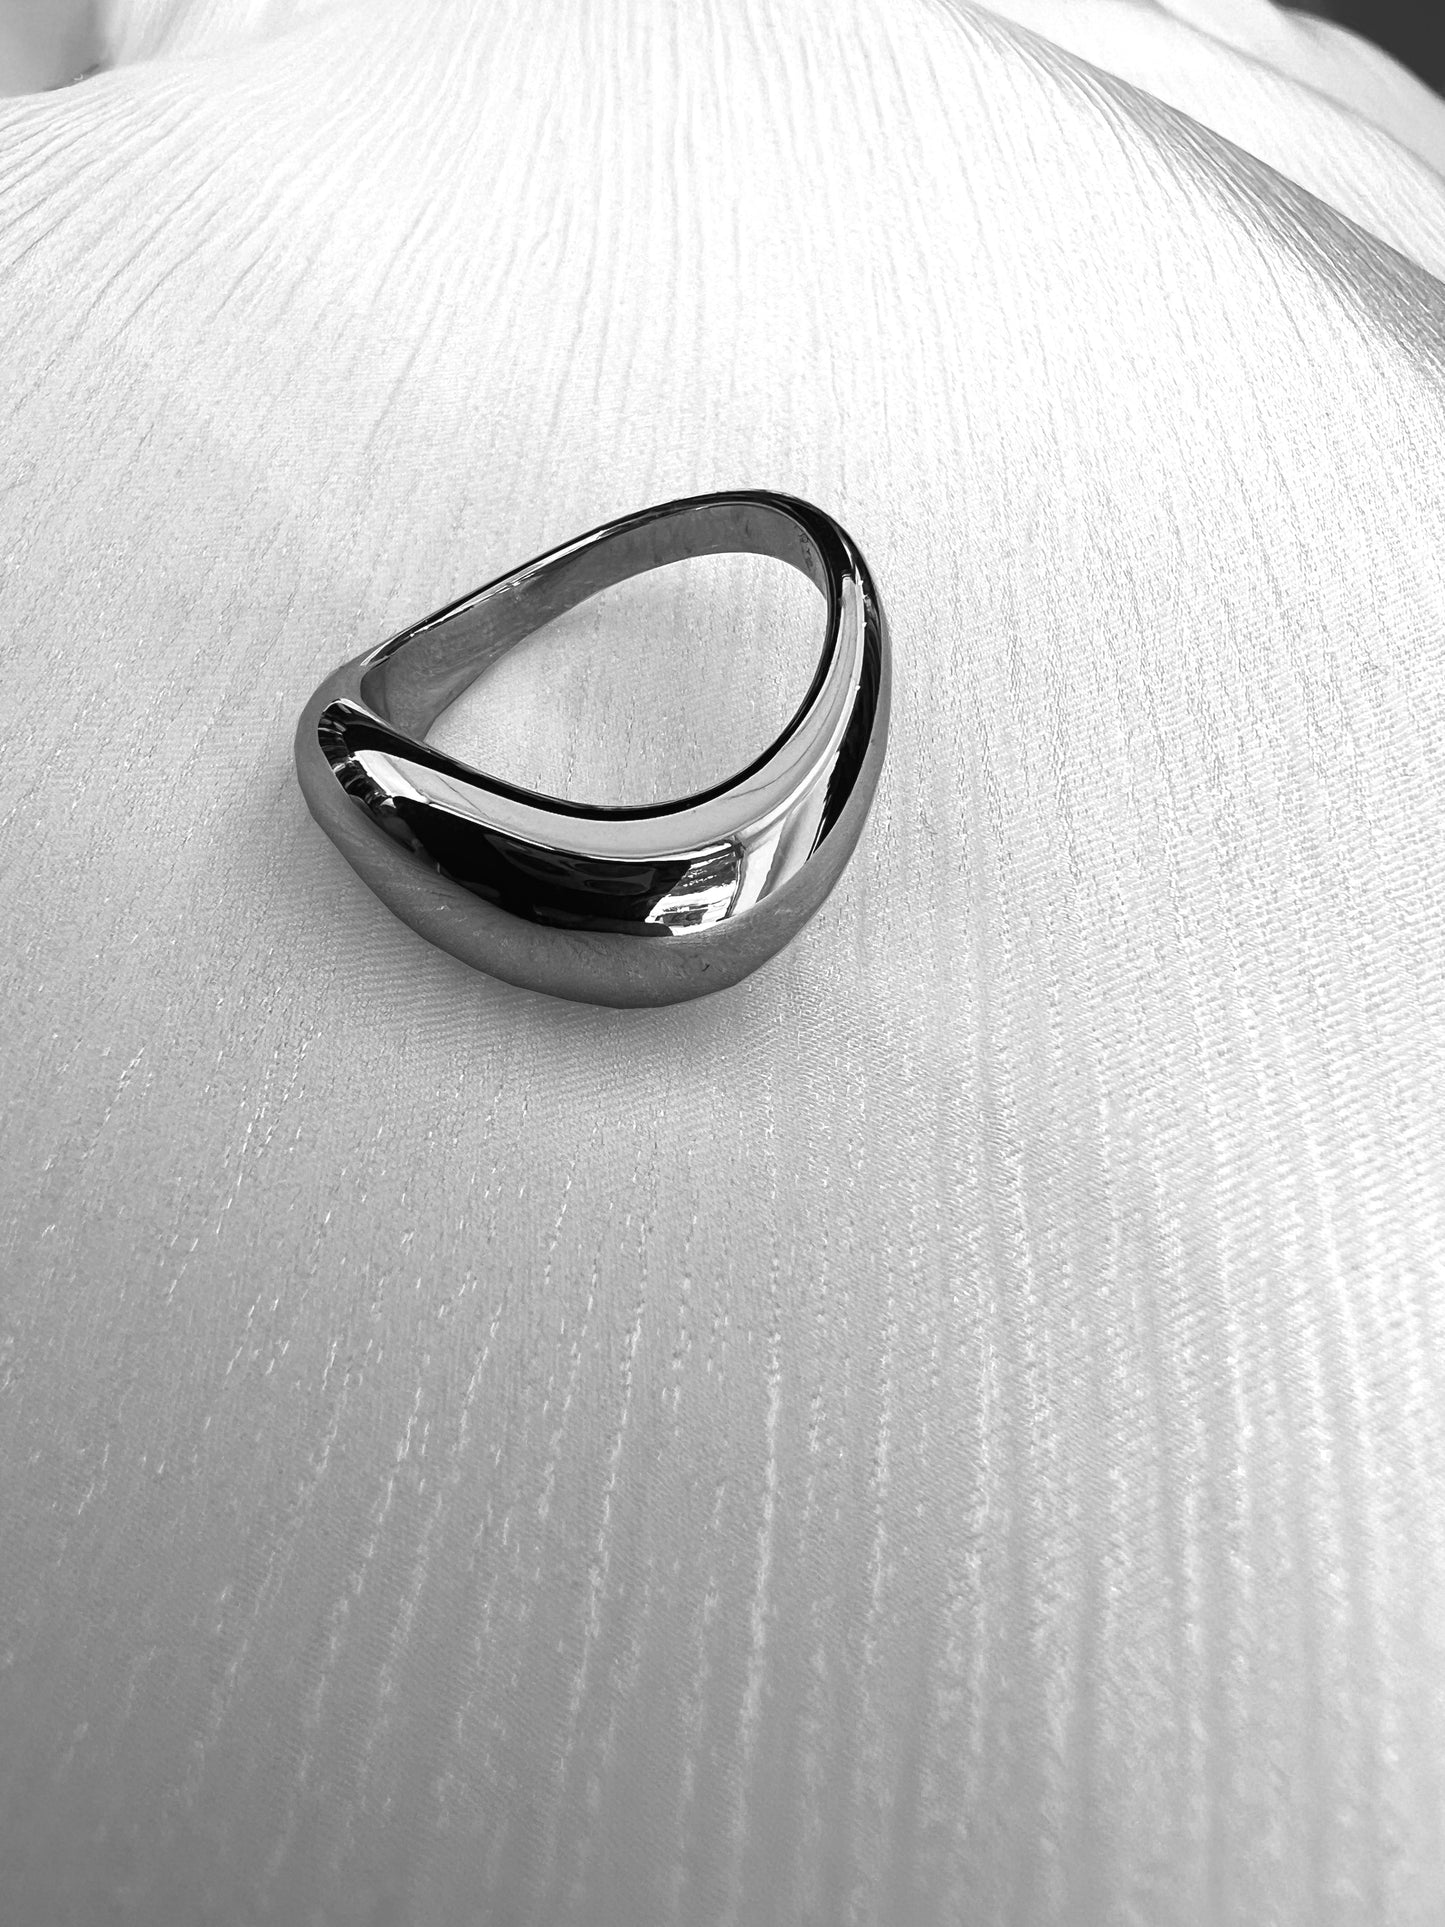 SILVER RING